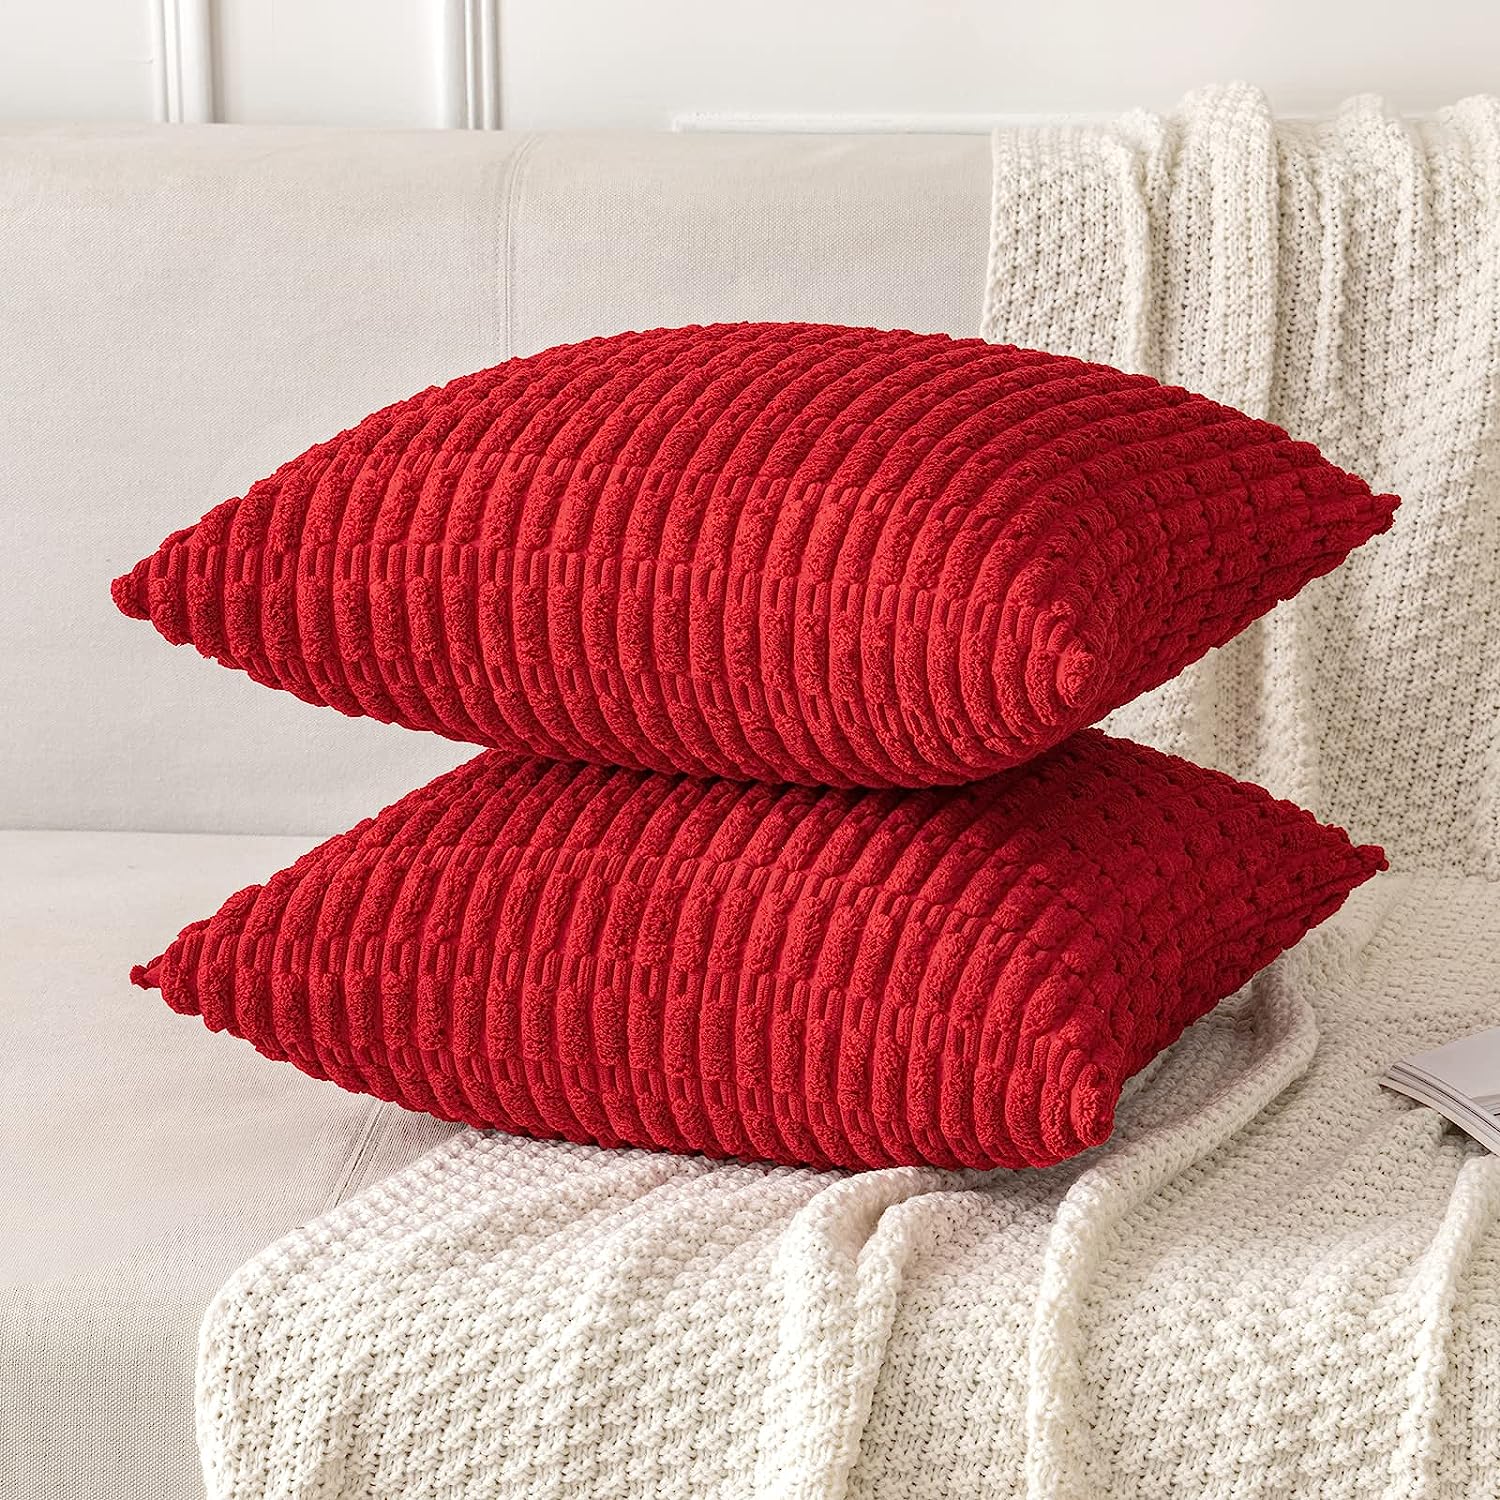 Home Brilliant Throw Pillow Covers 18x18 Solid Plush Corduroy Striped  Square Pillow Covers for Couch Set of 2 Fall Decorative Pillows for Living  Room